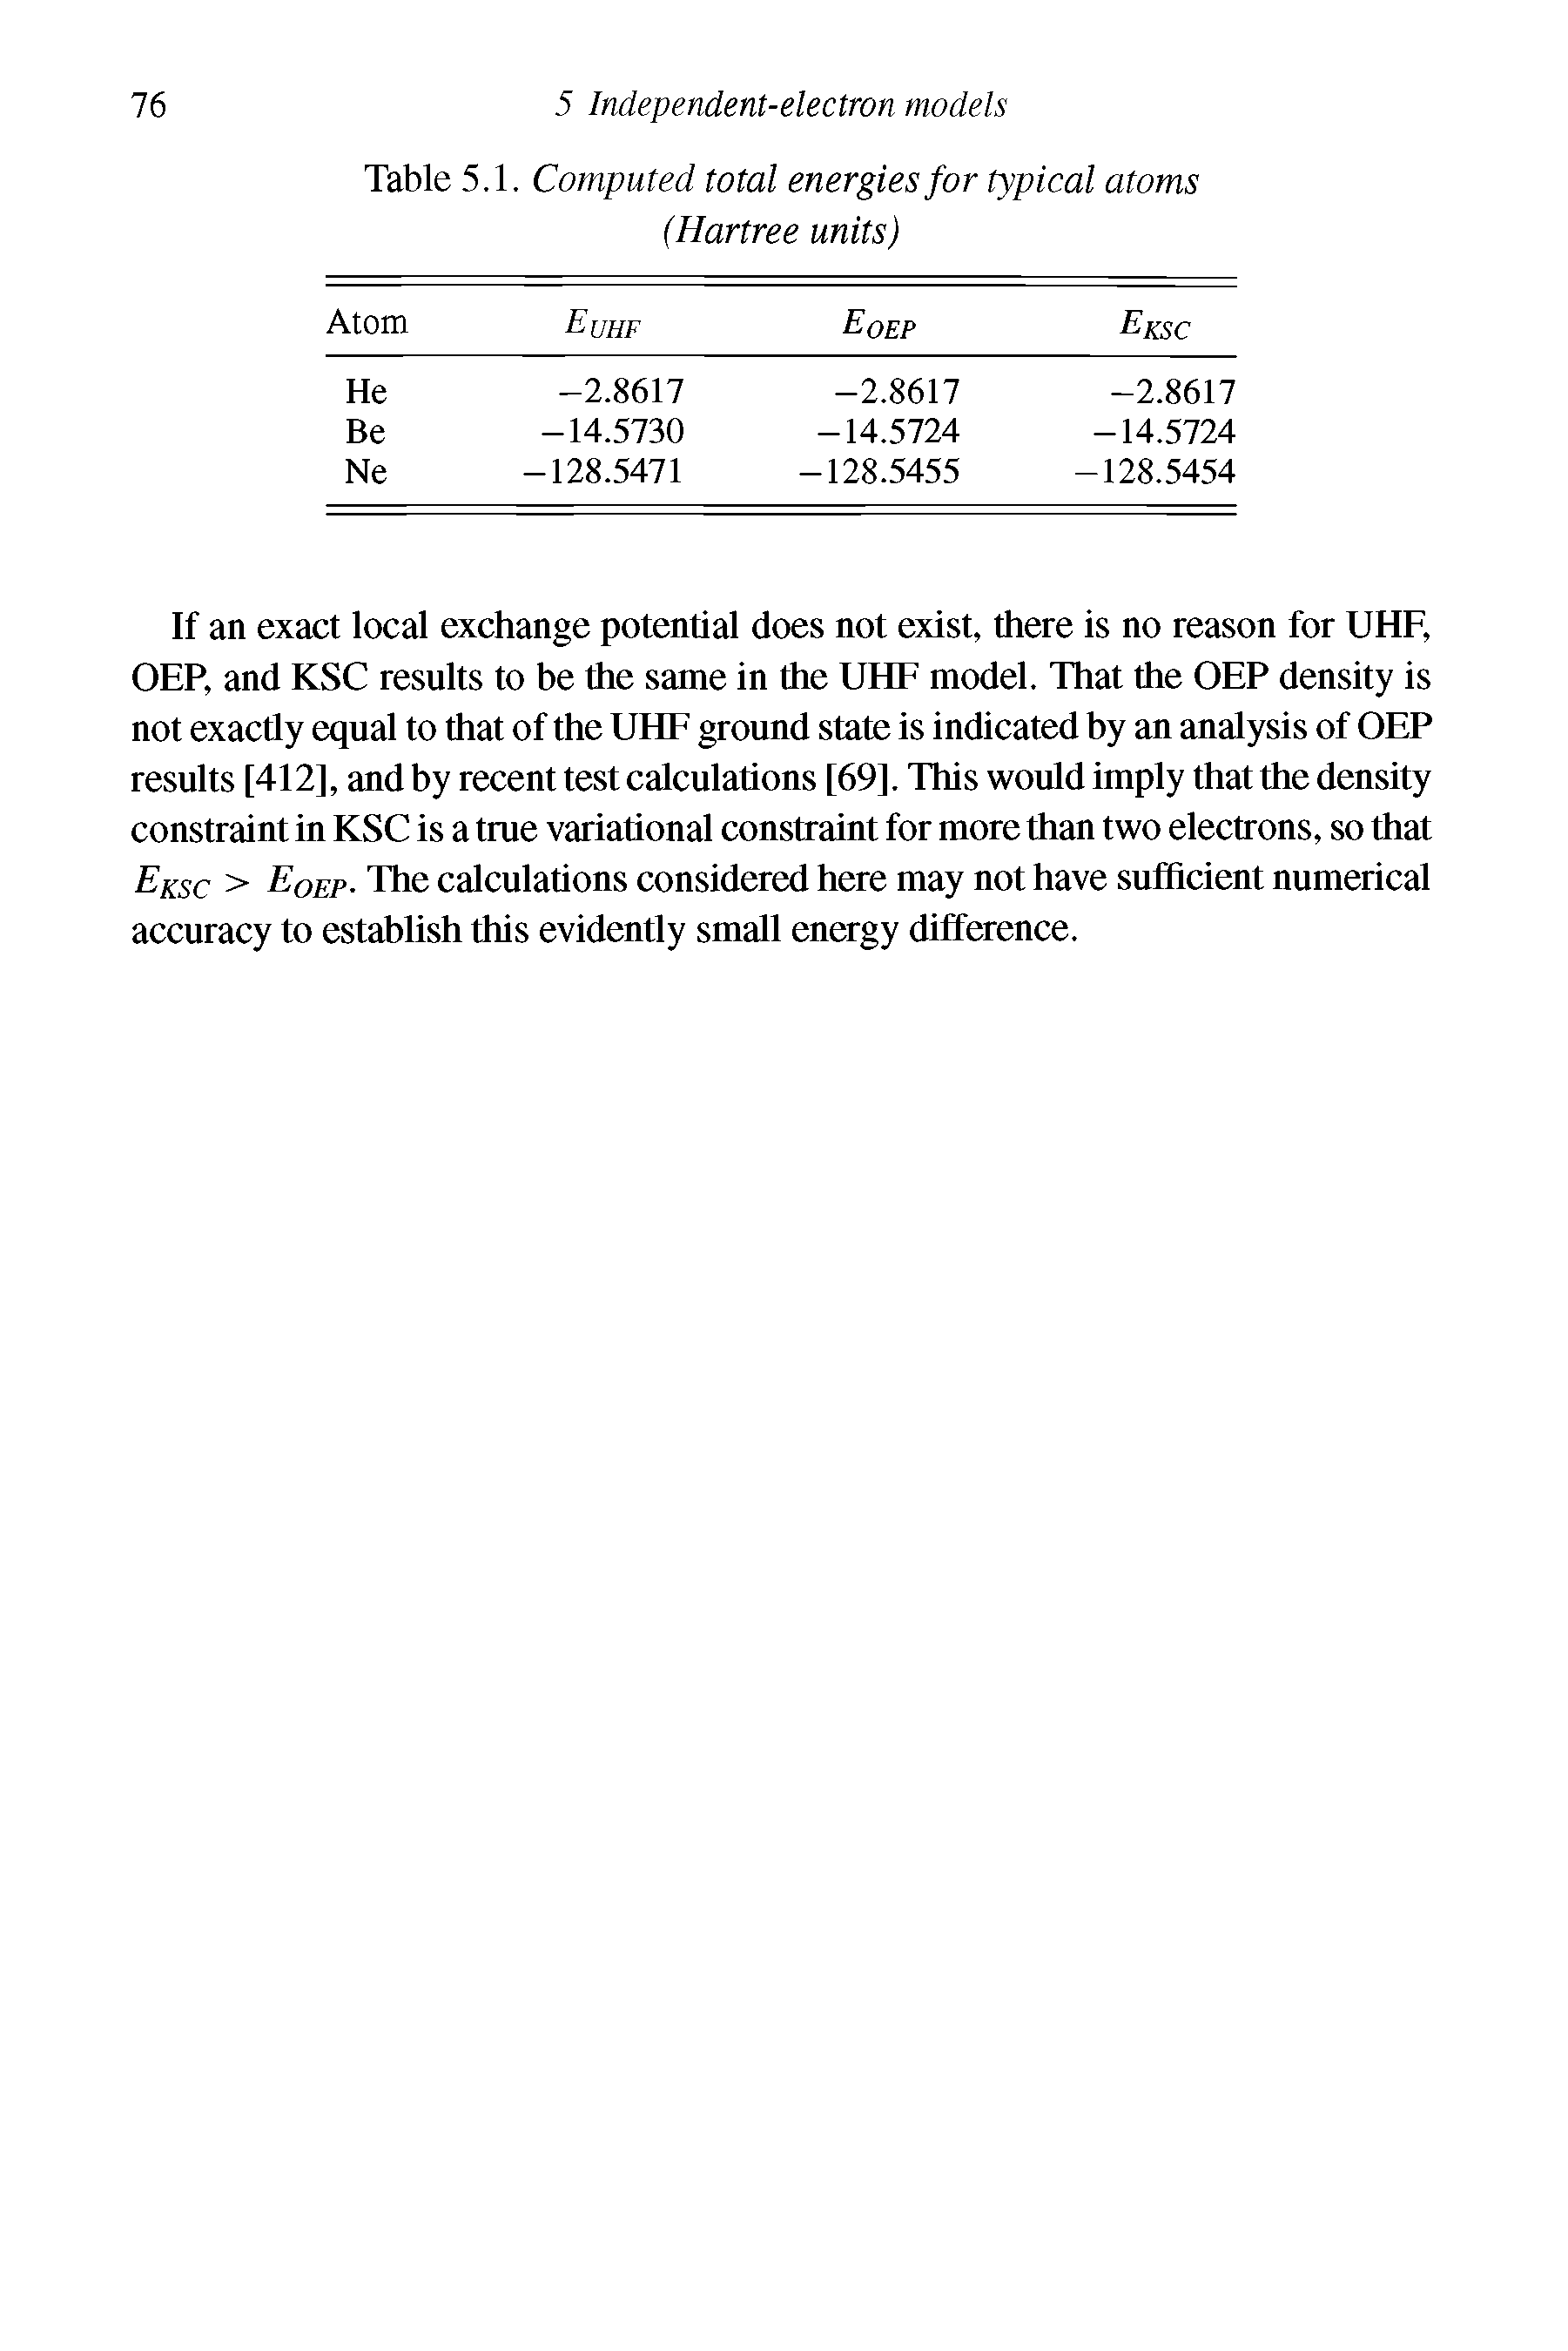 Table 5.1. Computed total energies for typical atoms (Hartree units)...